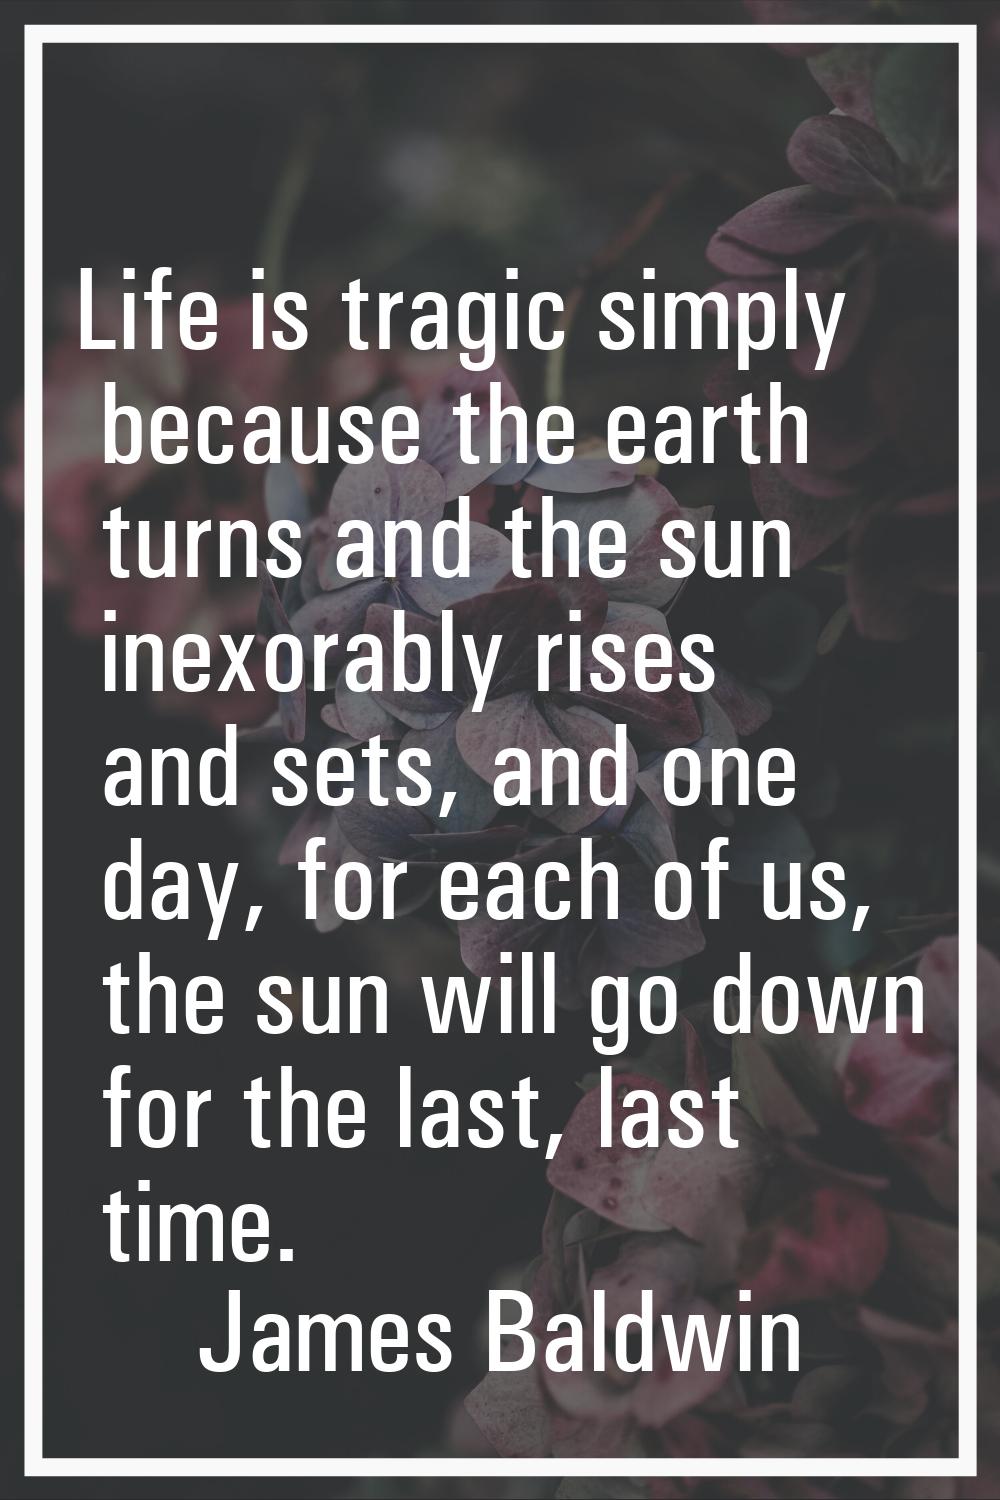 Life is tragic simply because the earth turns and the sun inexorably rises and sets, and one day, f